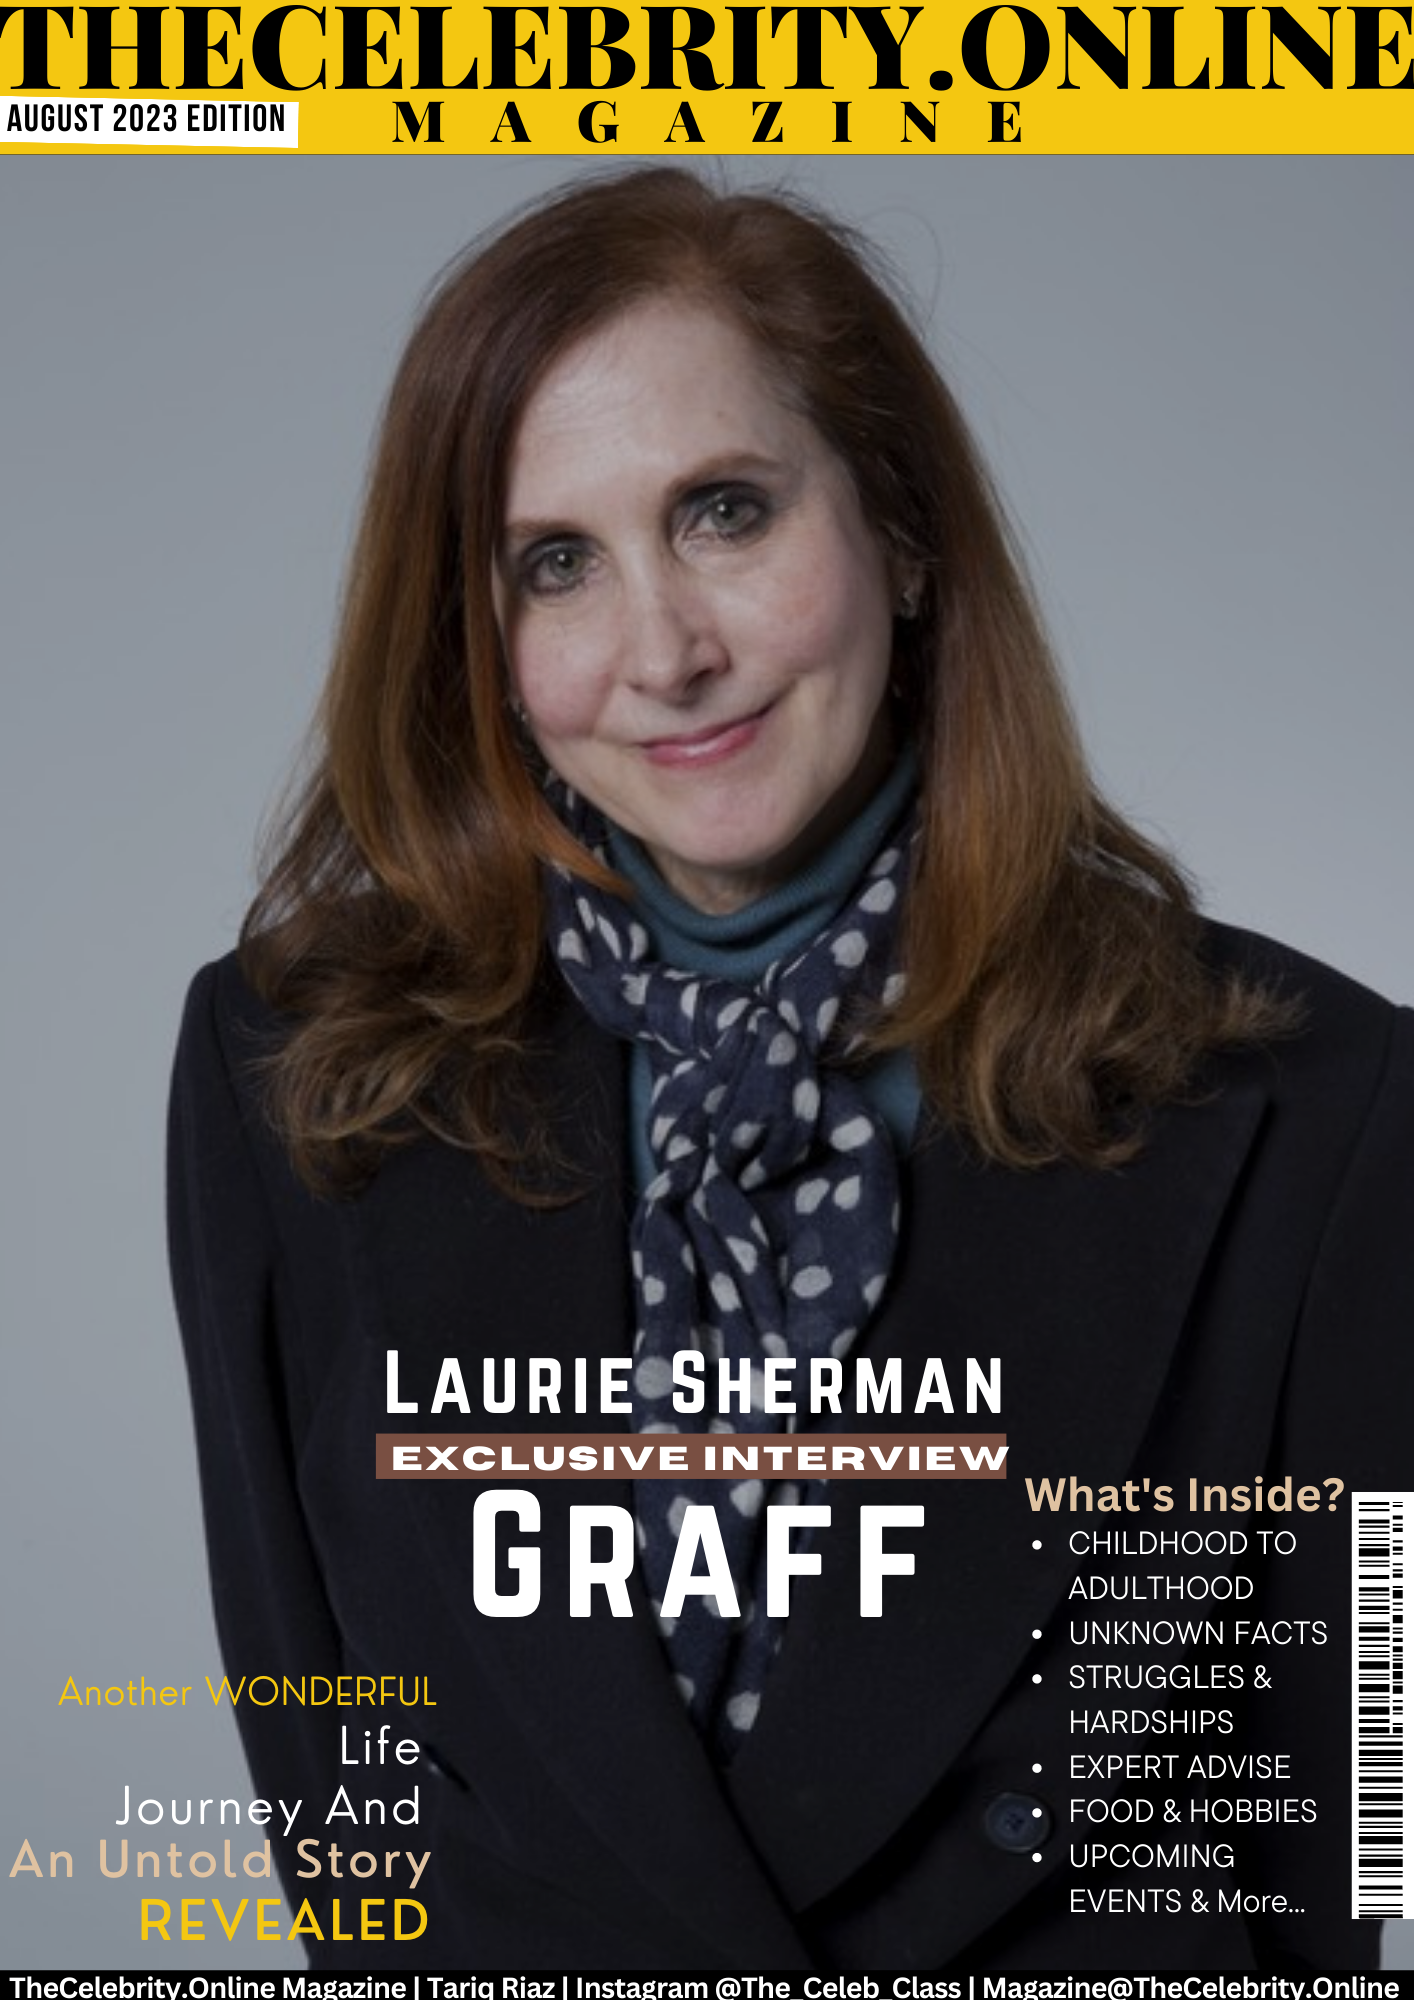 Laurie Sherman Graff Exclusive Interview – ‘Find Your Life Purpose That Makes You Feel Happy’